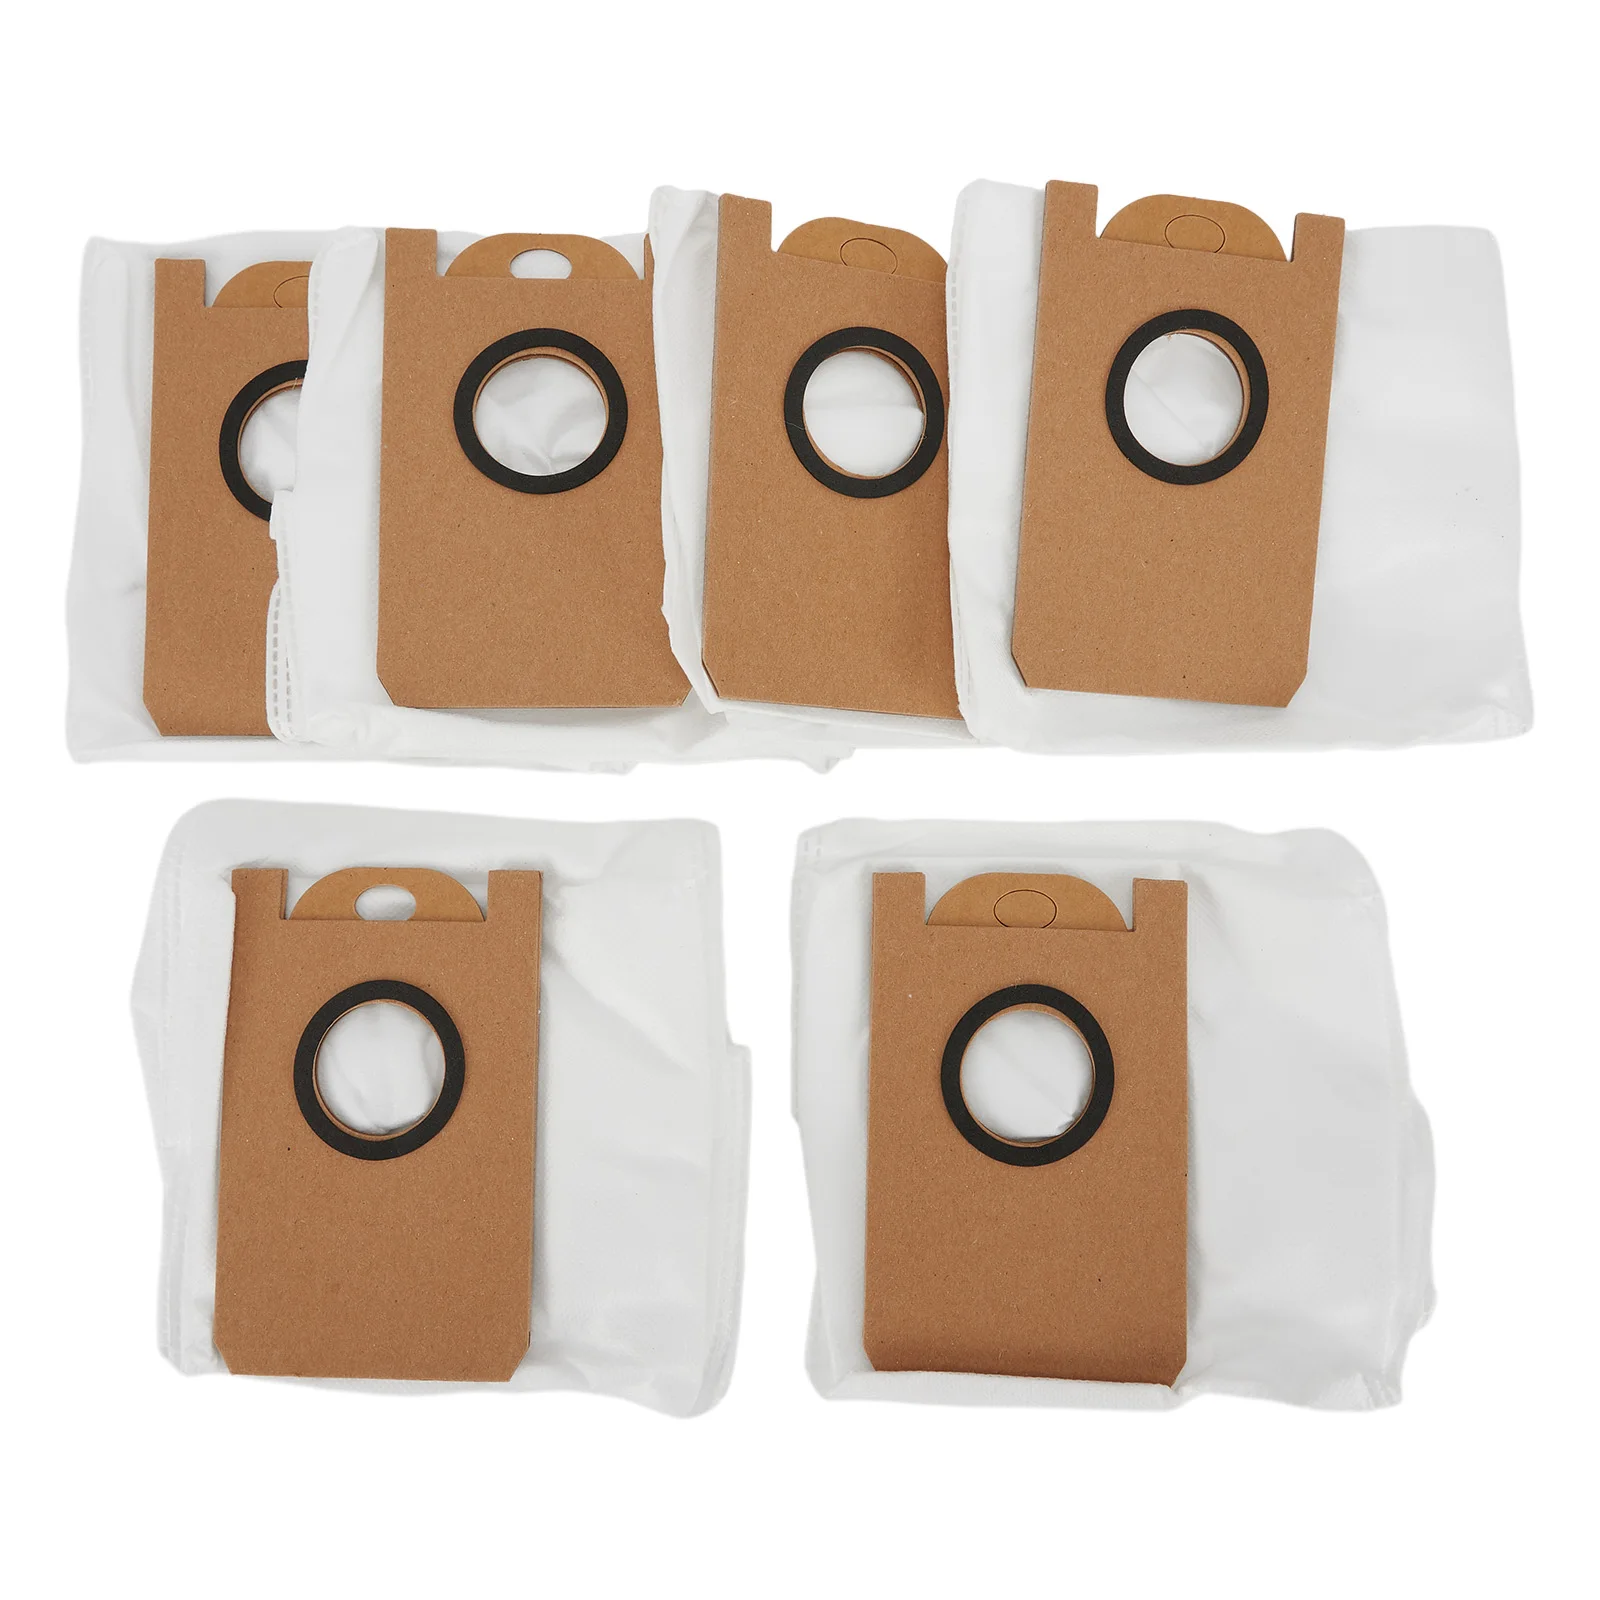 

6PCS Dust Bags Collector Sets For Imou L11/Pro Sweeping Robot Vacuum Cleaner Accessories Spare Parts Home Appliance Replace